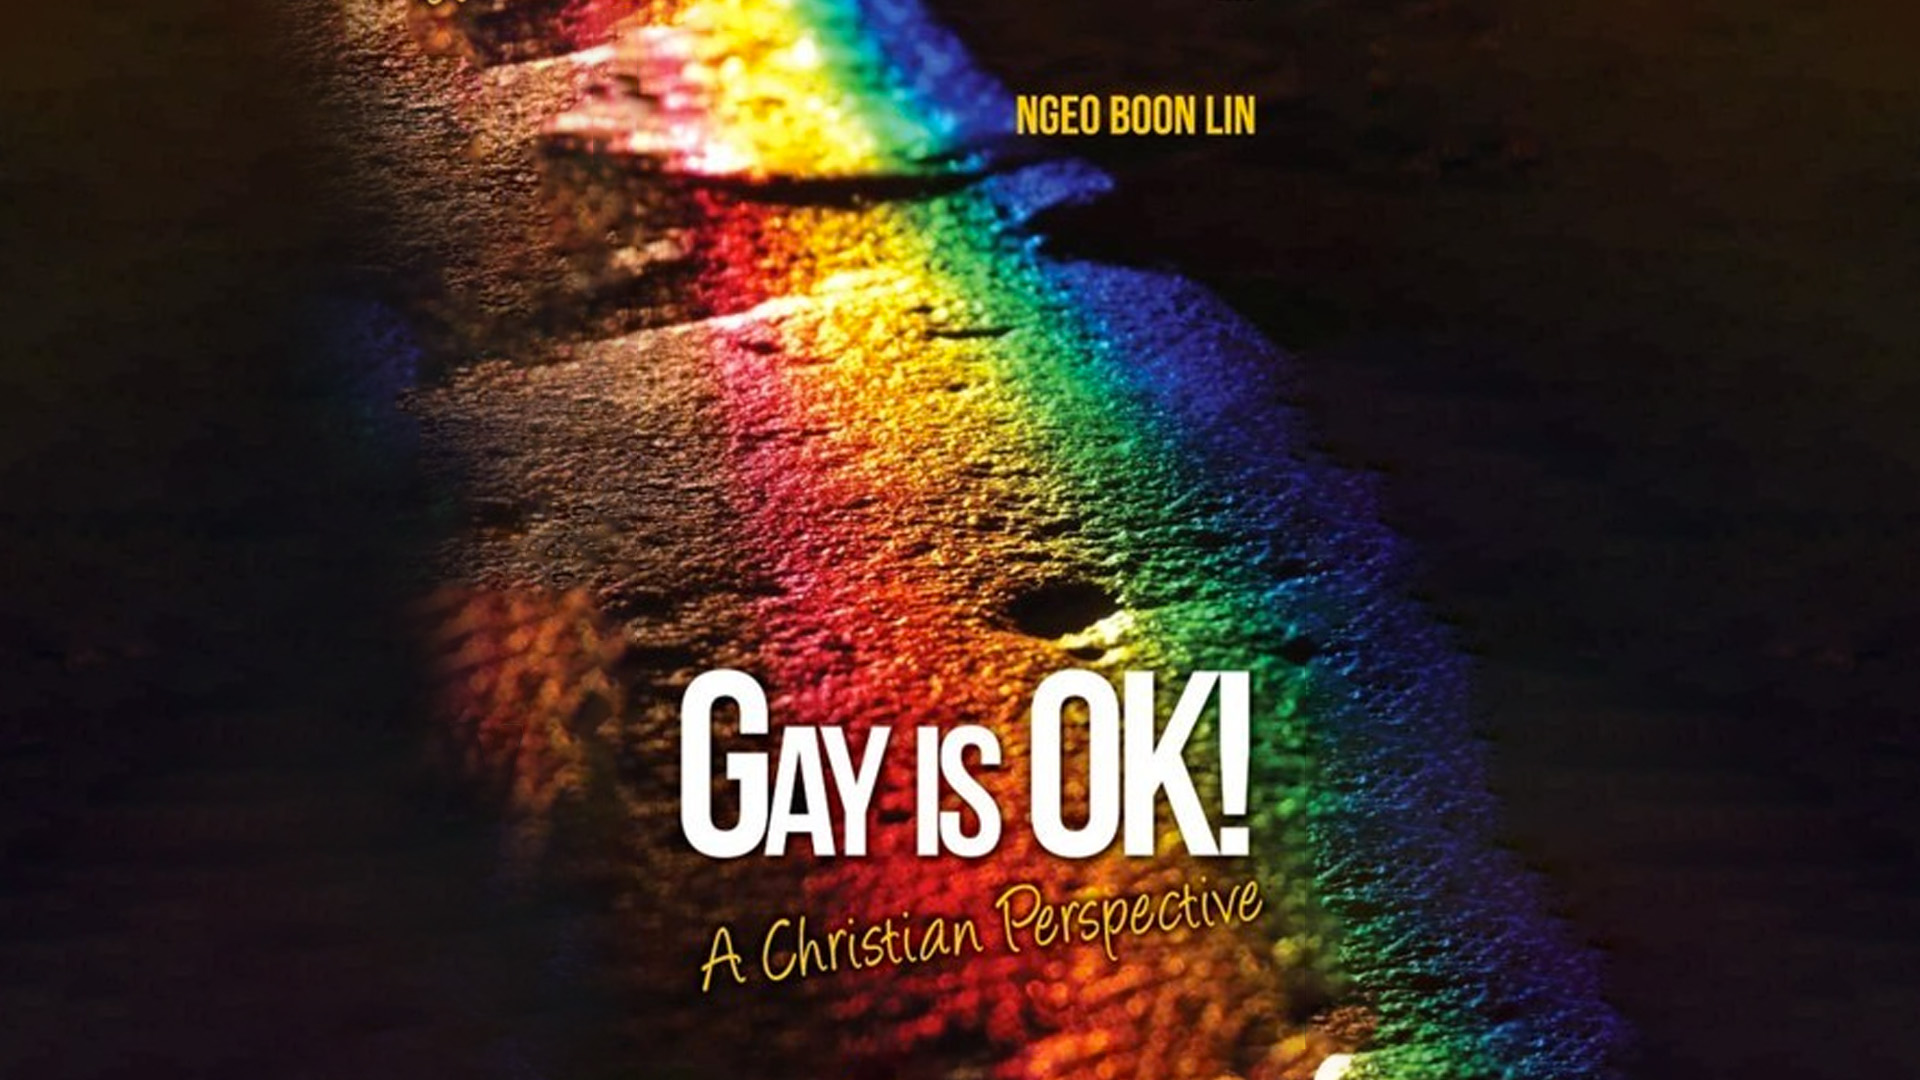 'Gay is OK!' writer, publisher seek leave to appeal to apex court against book ban